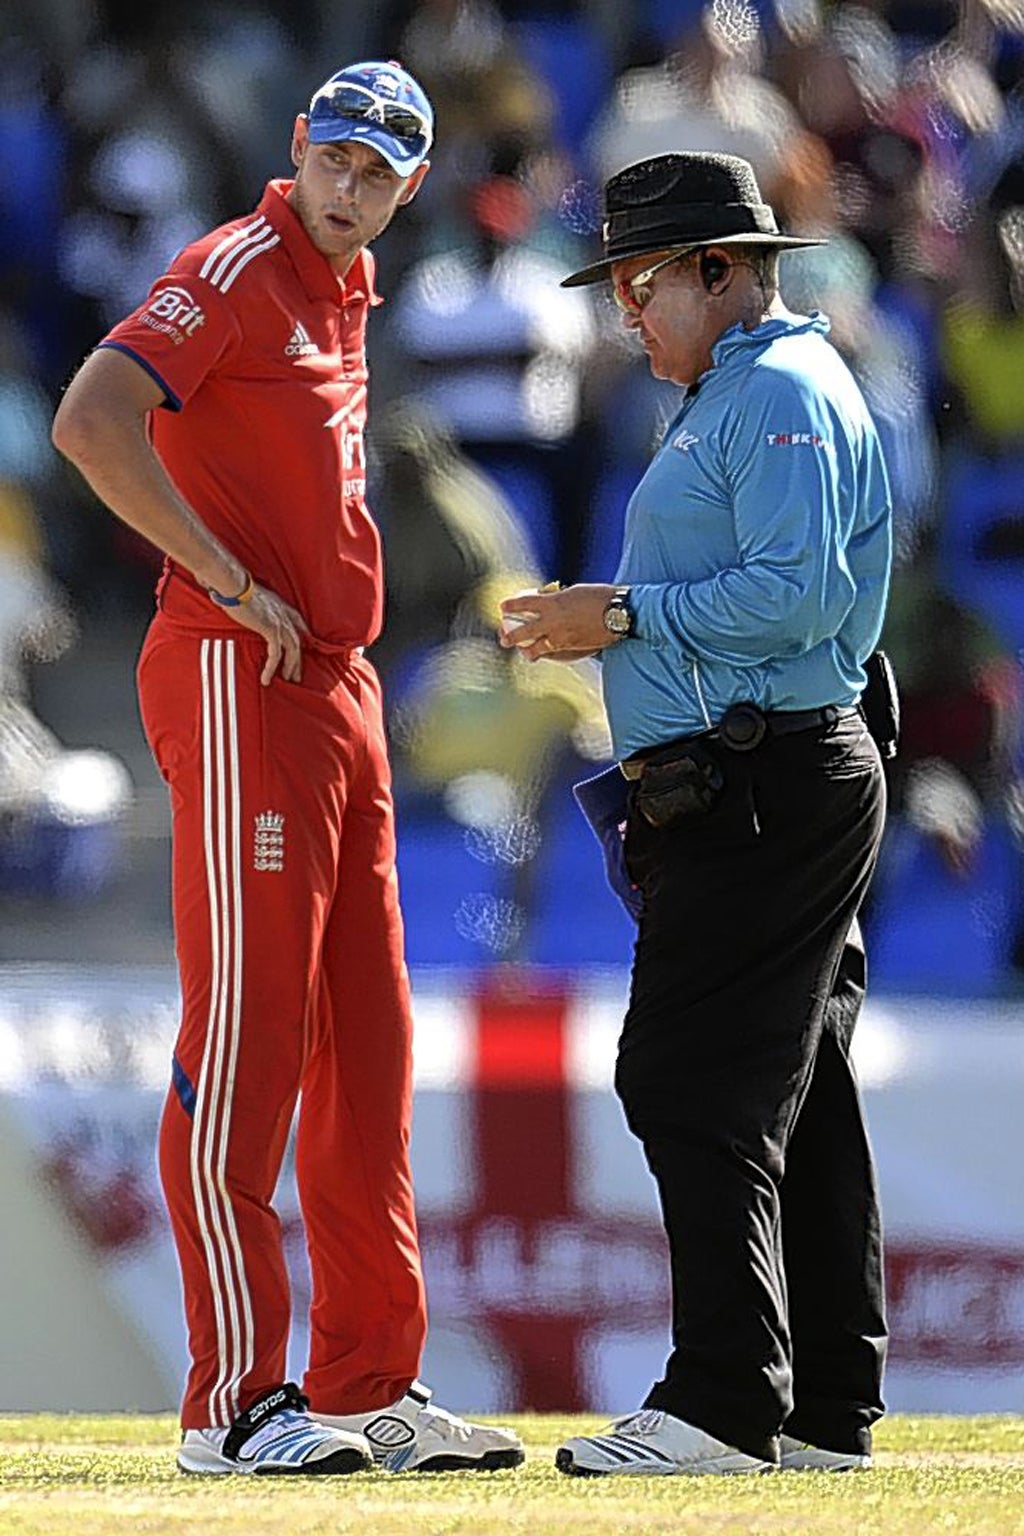 Stuart Broad is consulted by umpire Marais Erasmus over the condition of the ball